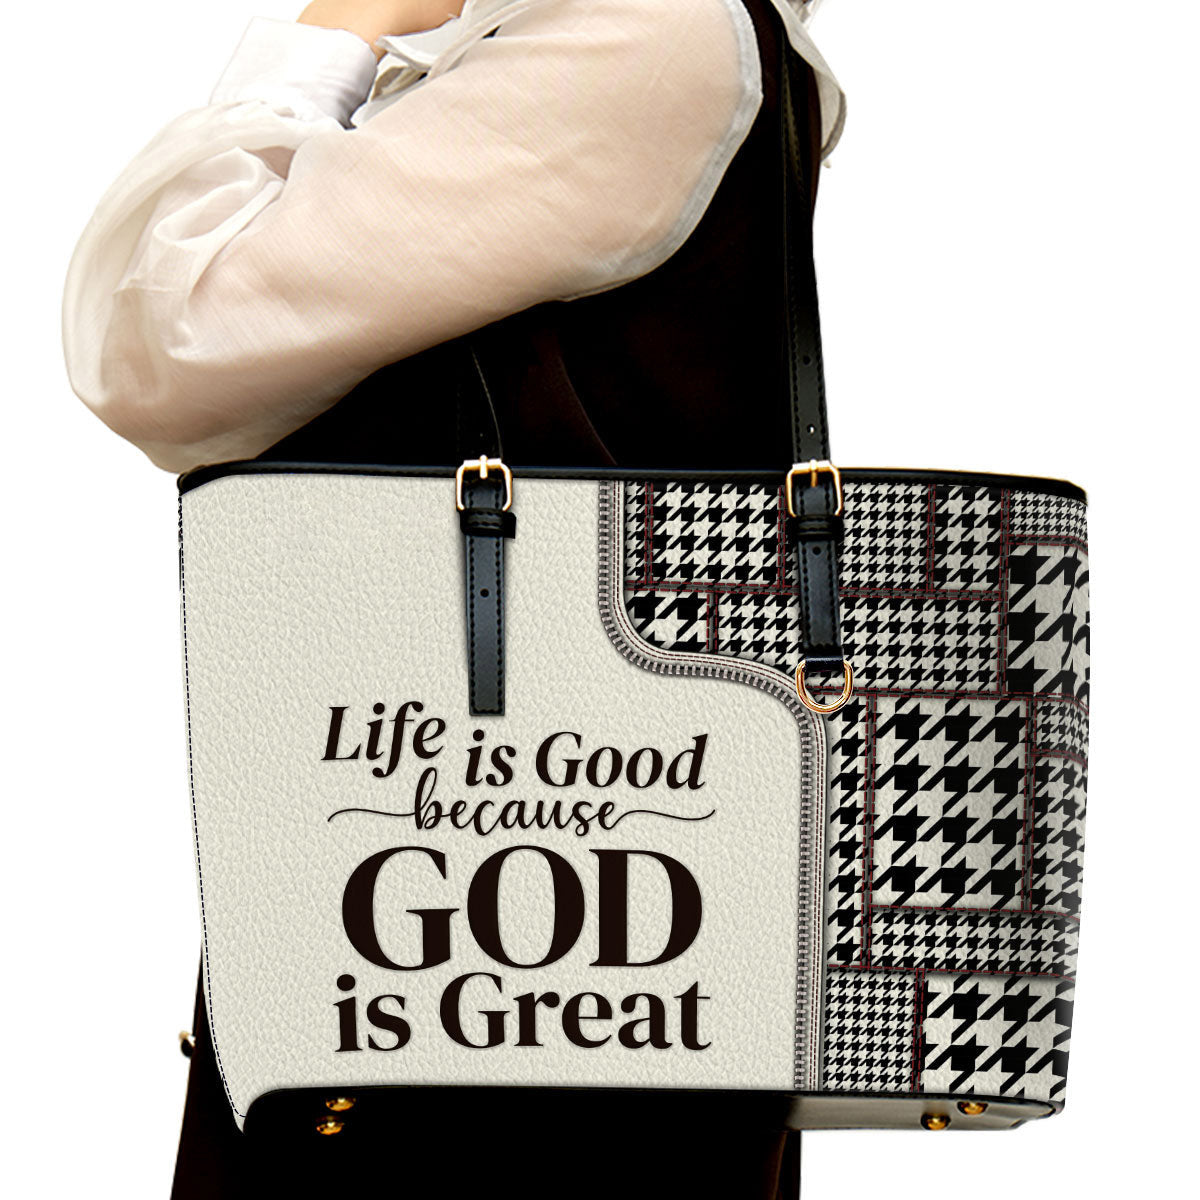 Life Is Good Because God Is Great Large Leather Tote Bag - Christ Gifts For Religious Women - Best Mother's Day Gifts